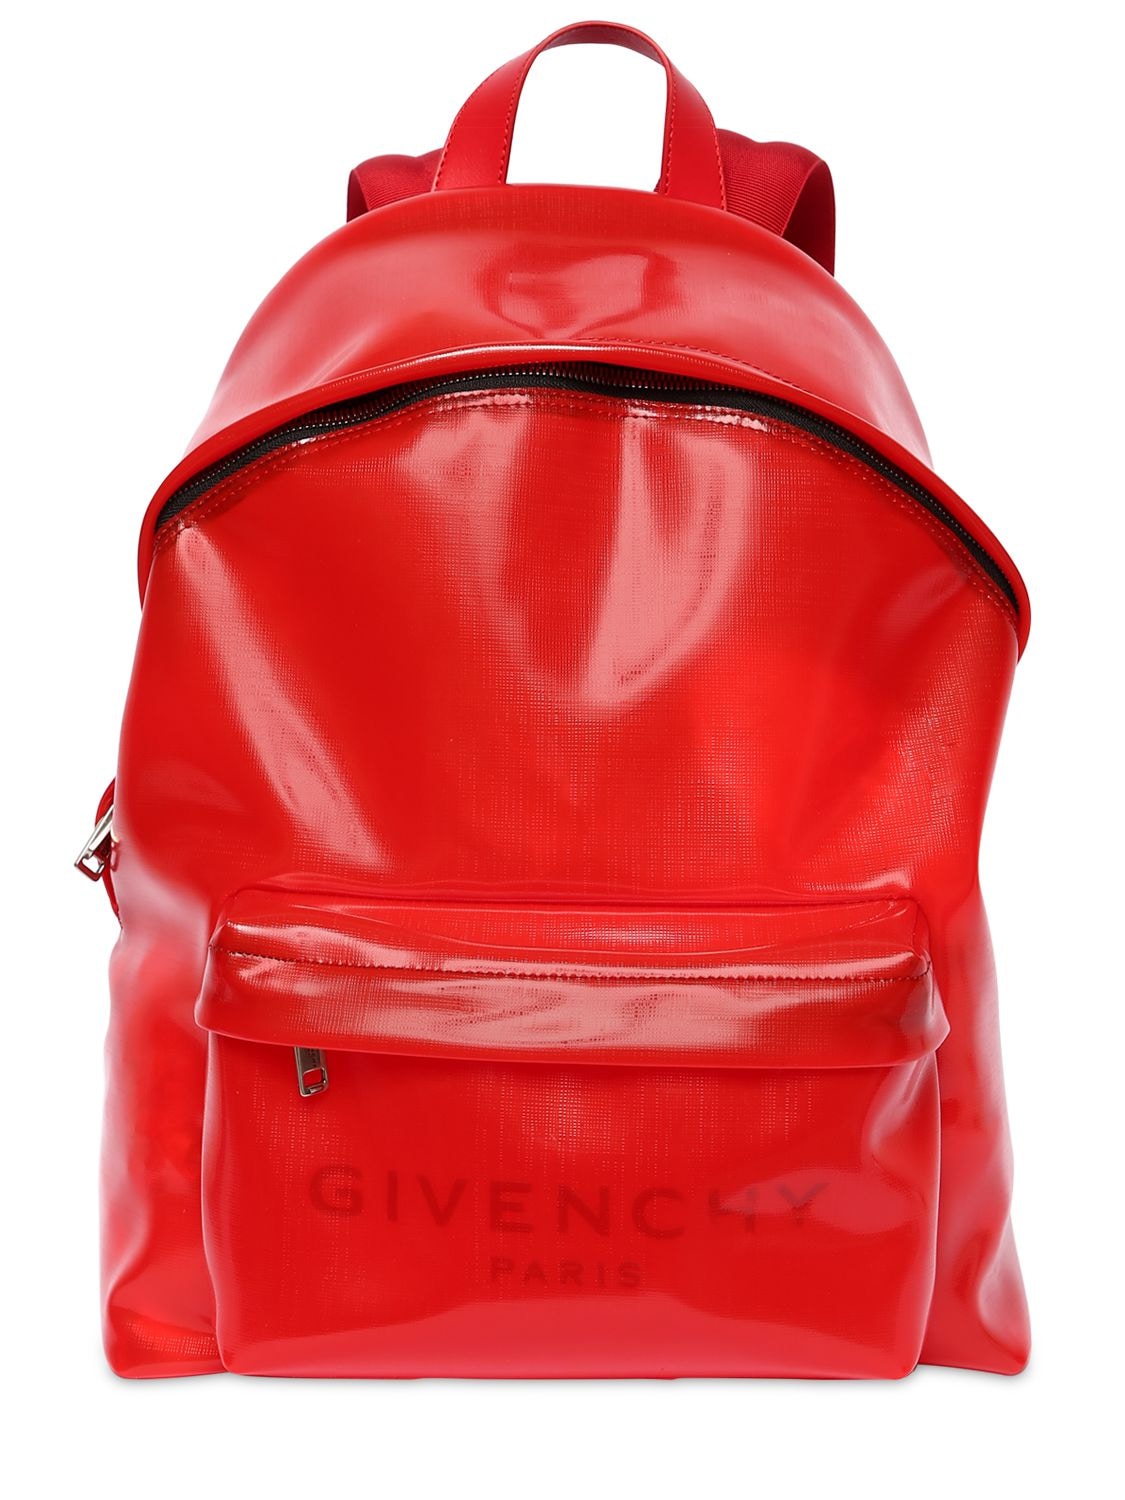 Transparent Plastic Backpack In Red 